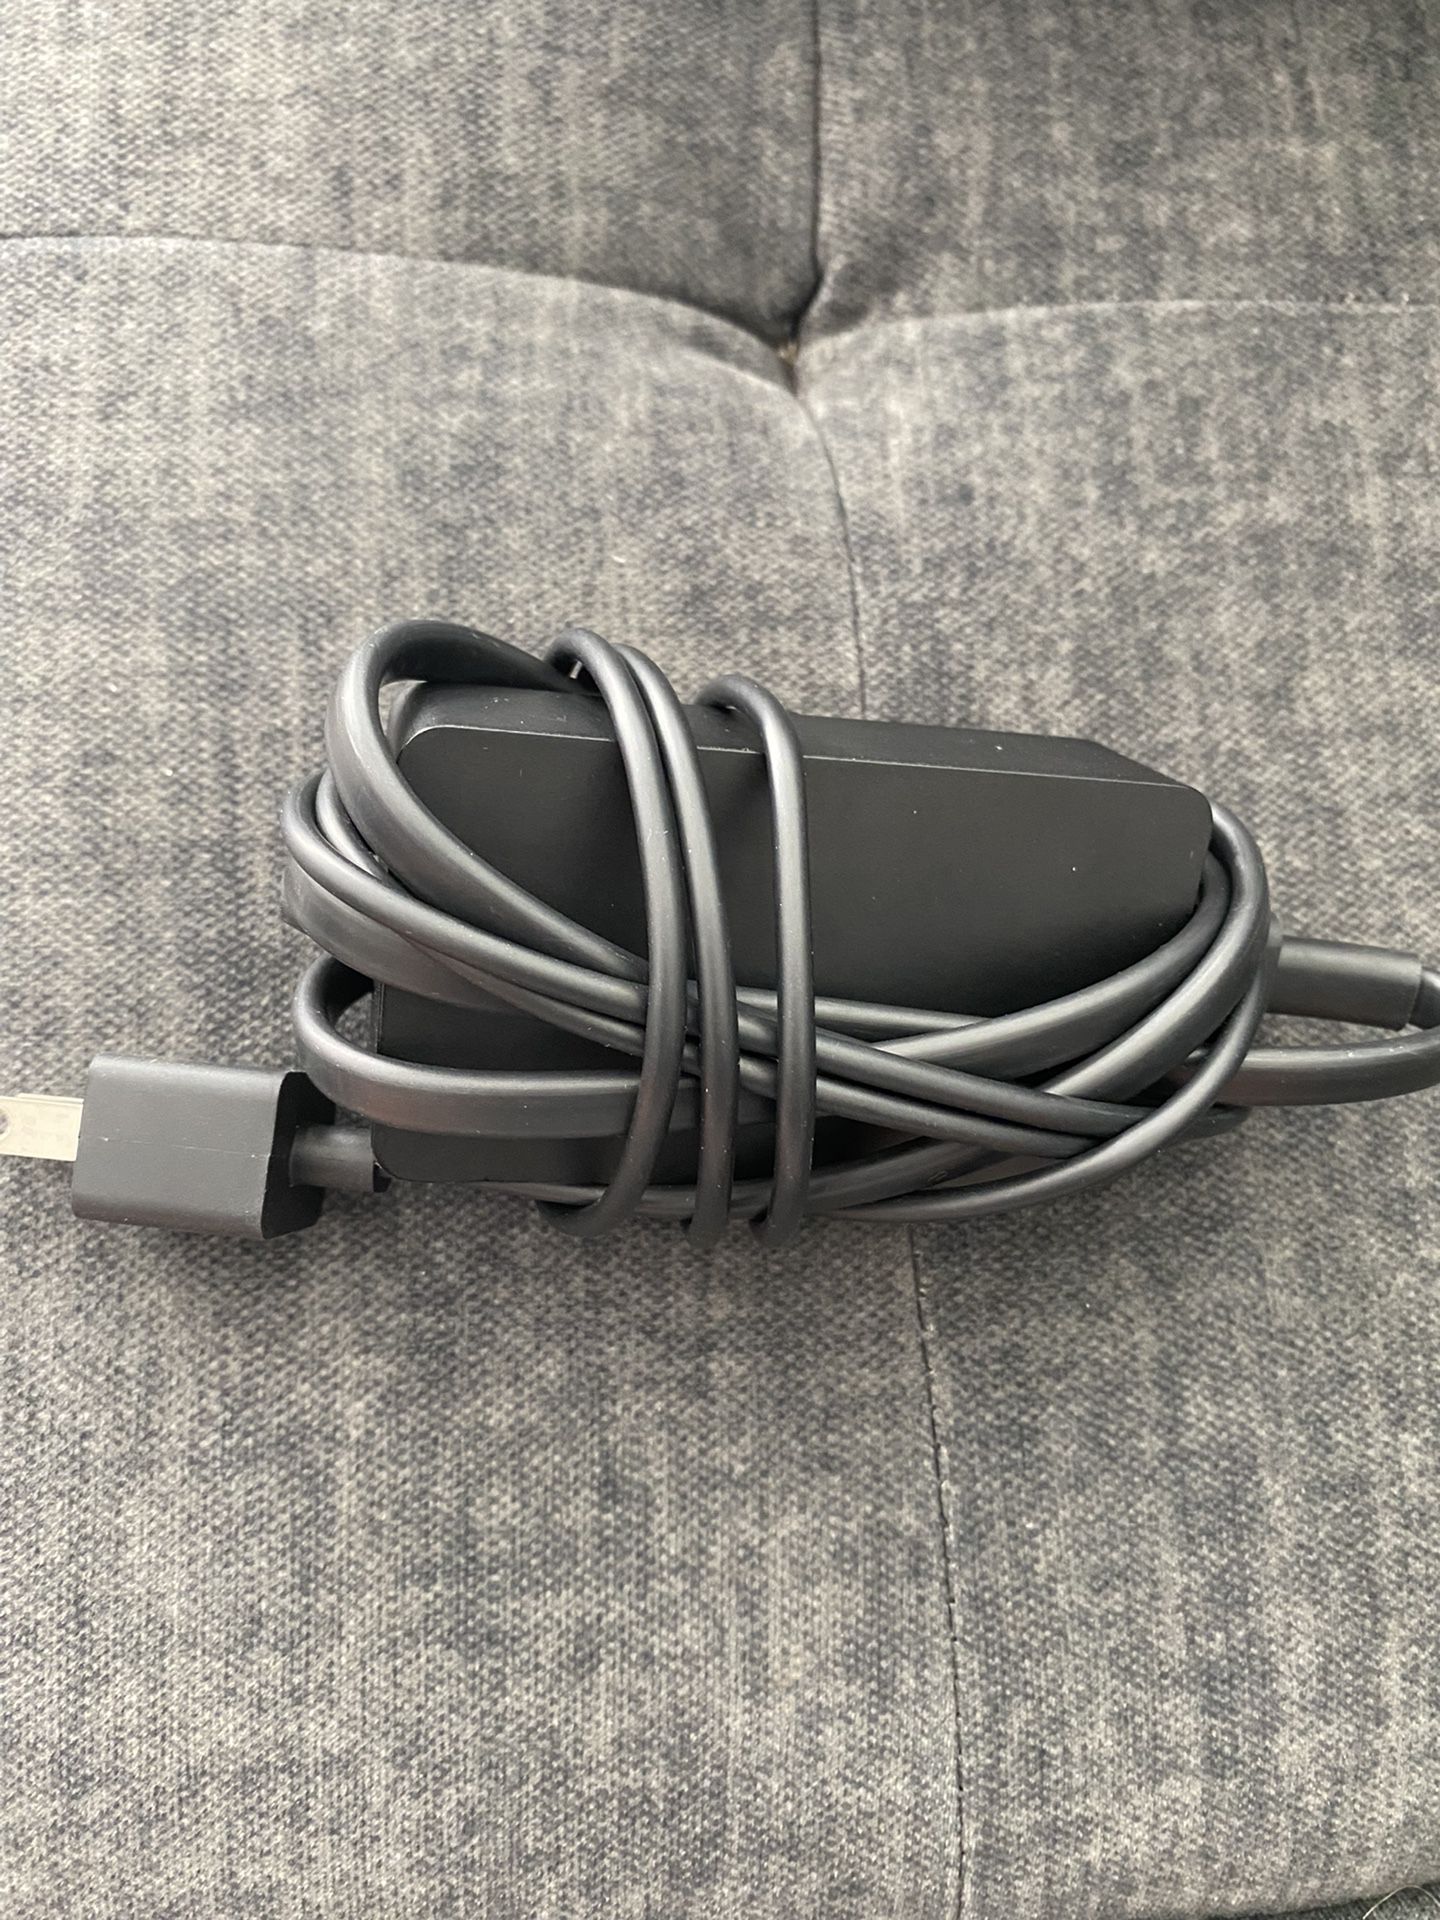 Microsoft Surface Pro 3 And 4 Charger